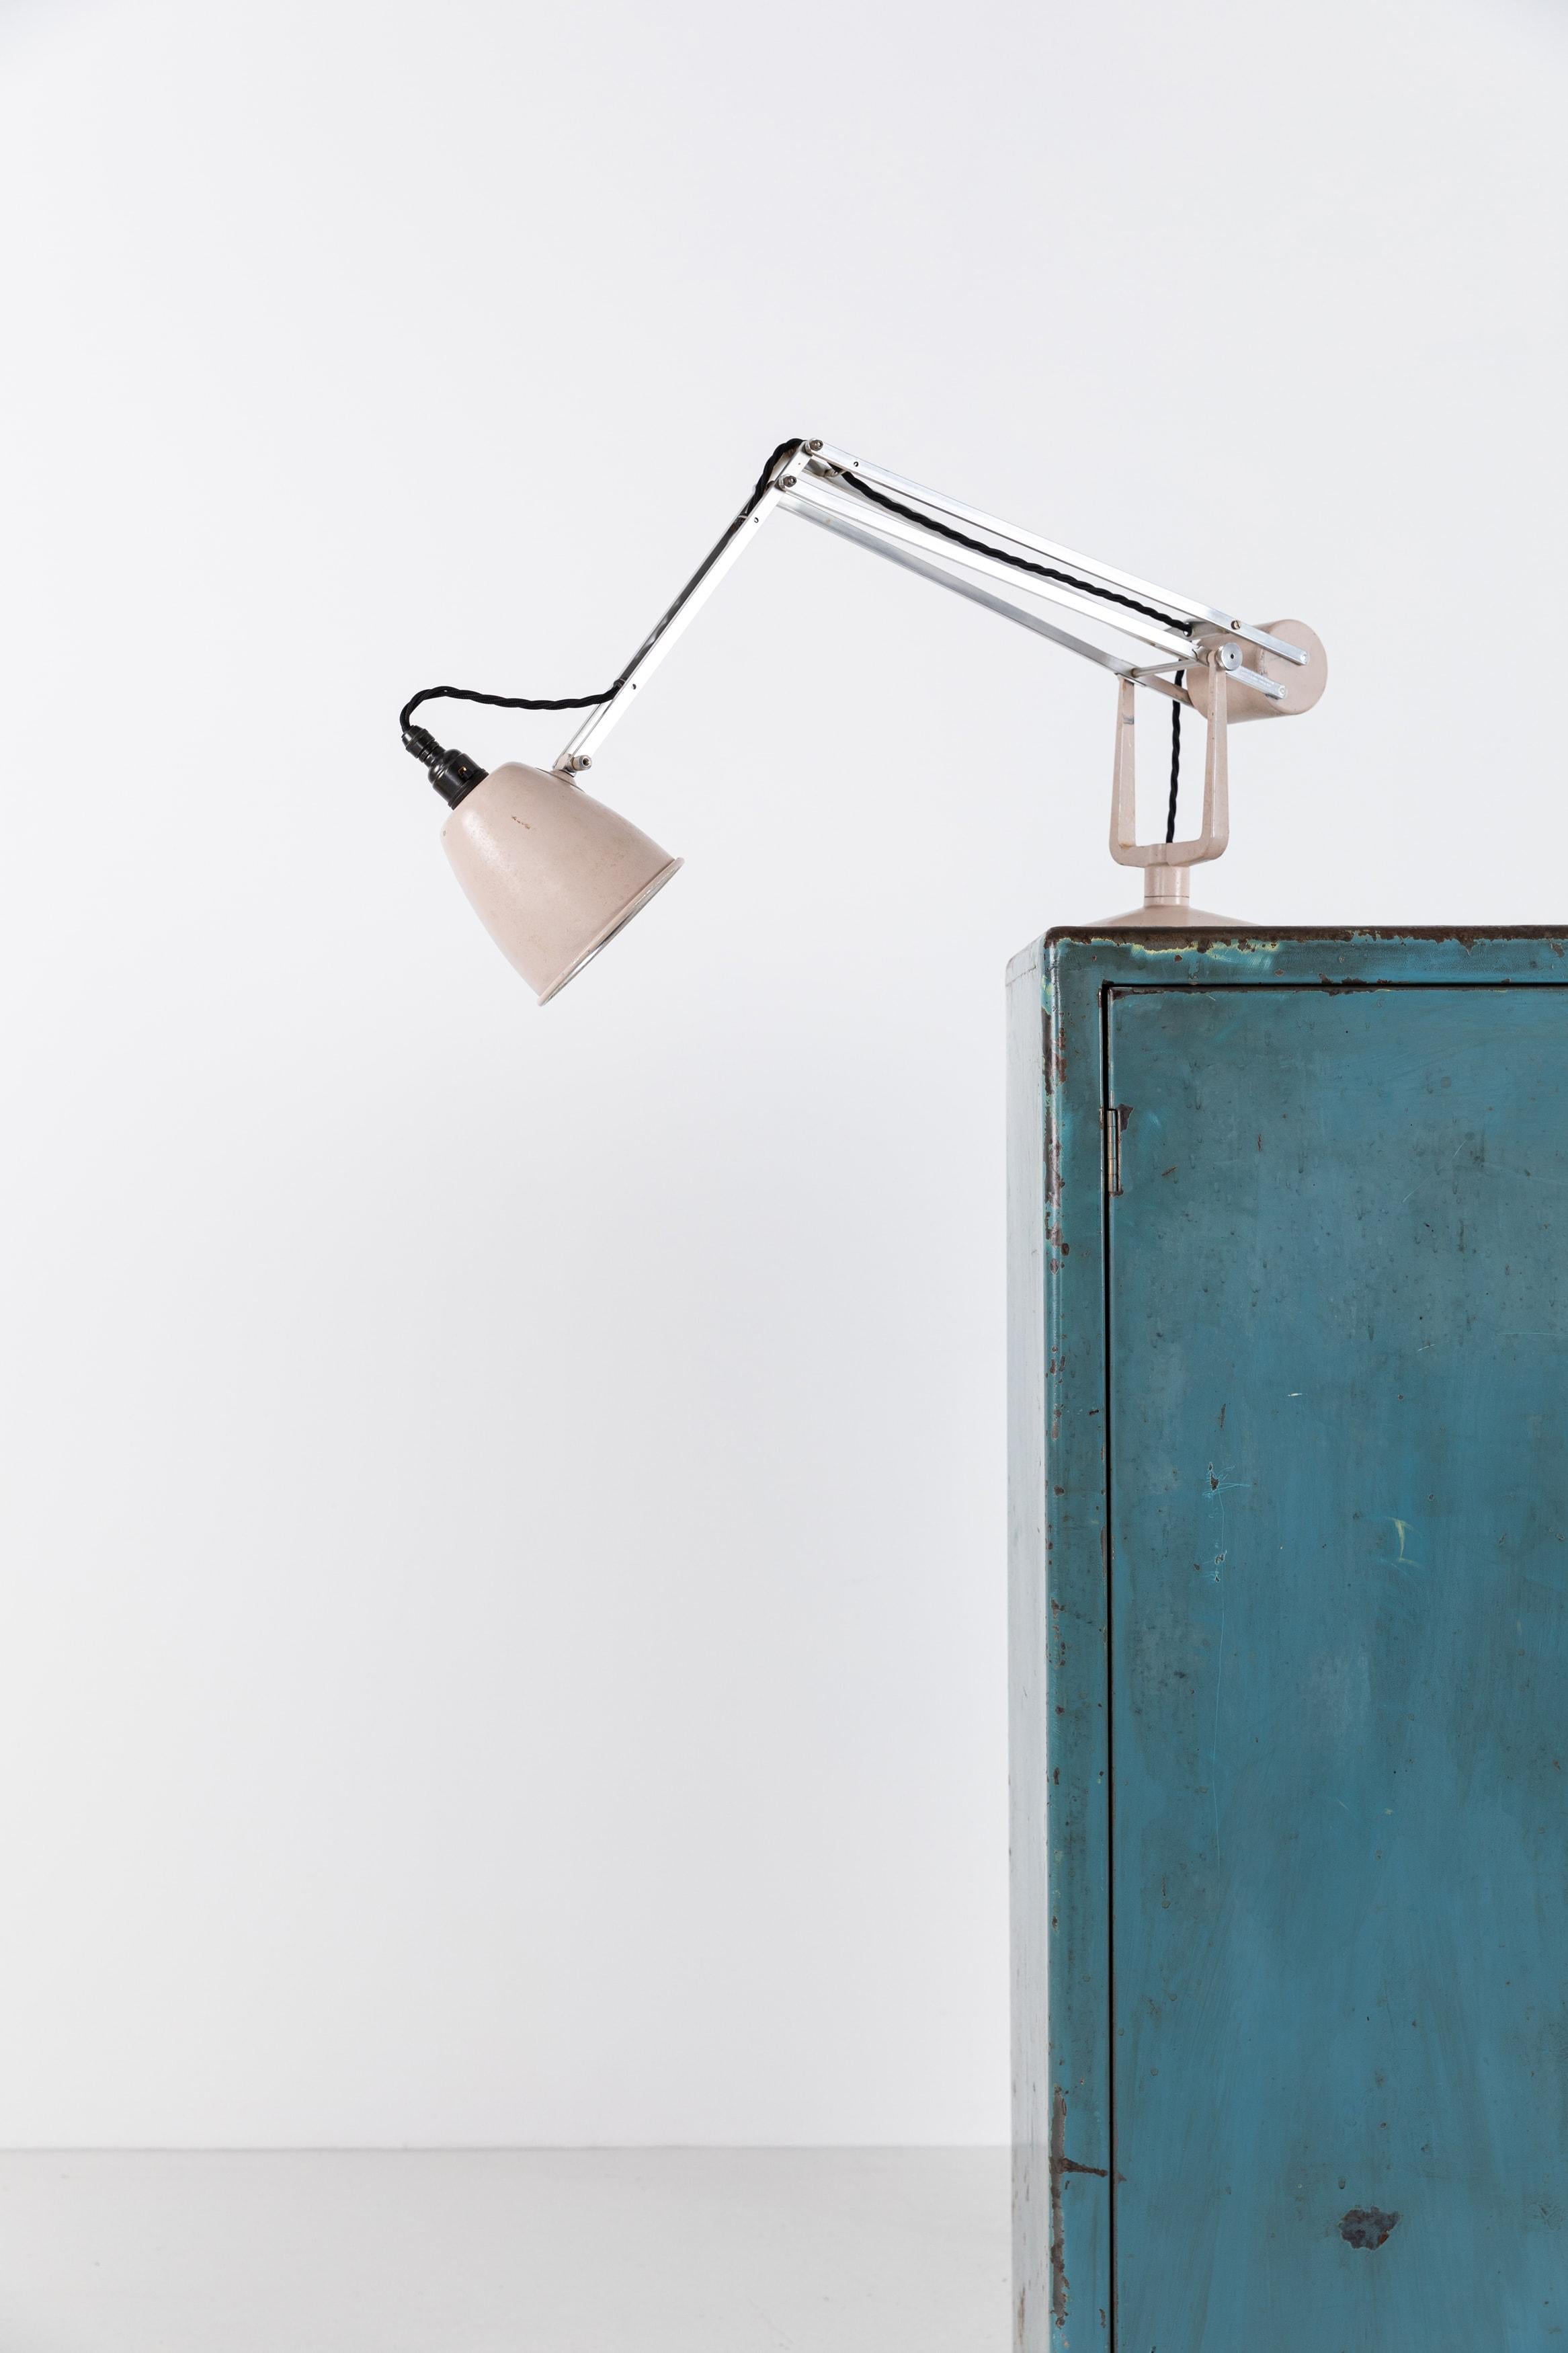 Stunning example of the iconic counterbalance 'Roller' lamp, ingeniously designed by Hadrill & Horstmann. c.1940

This lamp has survived in wonderful condition - bare aluminium arms with cream base and shade. The elegant weighted system allows the